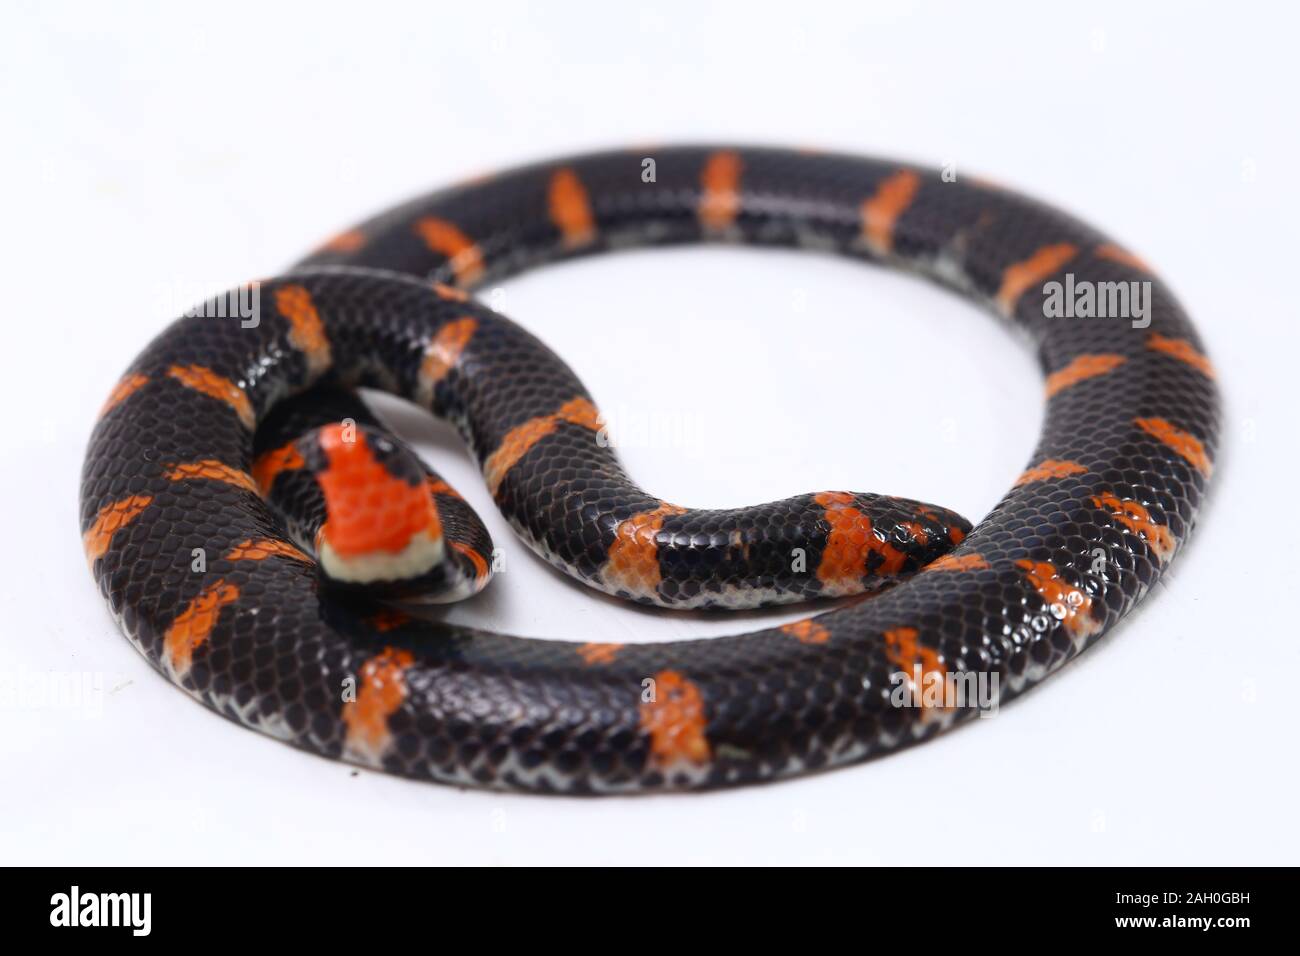 Red-tailed pipe snake (Scientific name Cylindrophis ruffus) isolate on  white background Stock Photo - Alamy